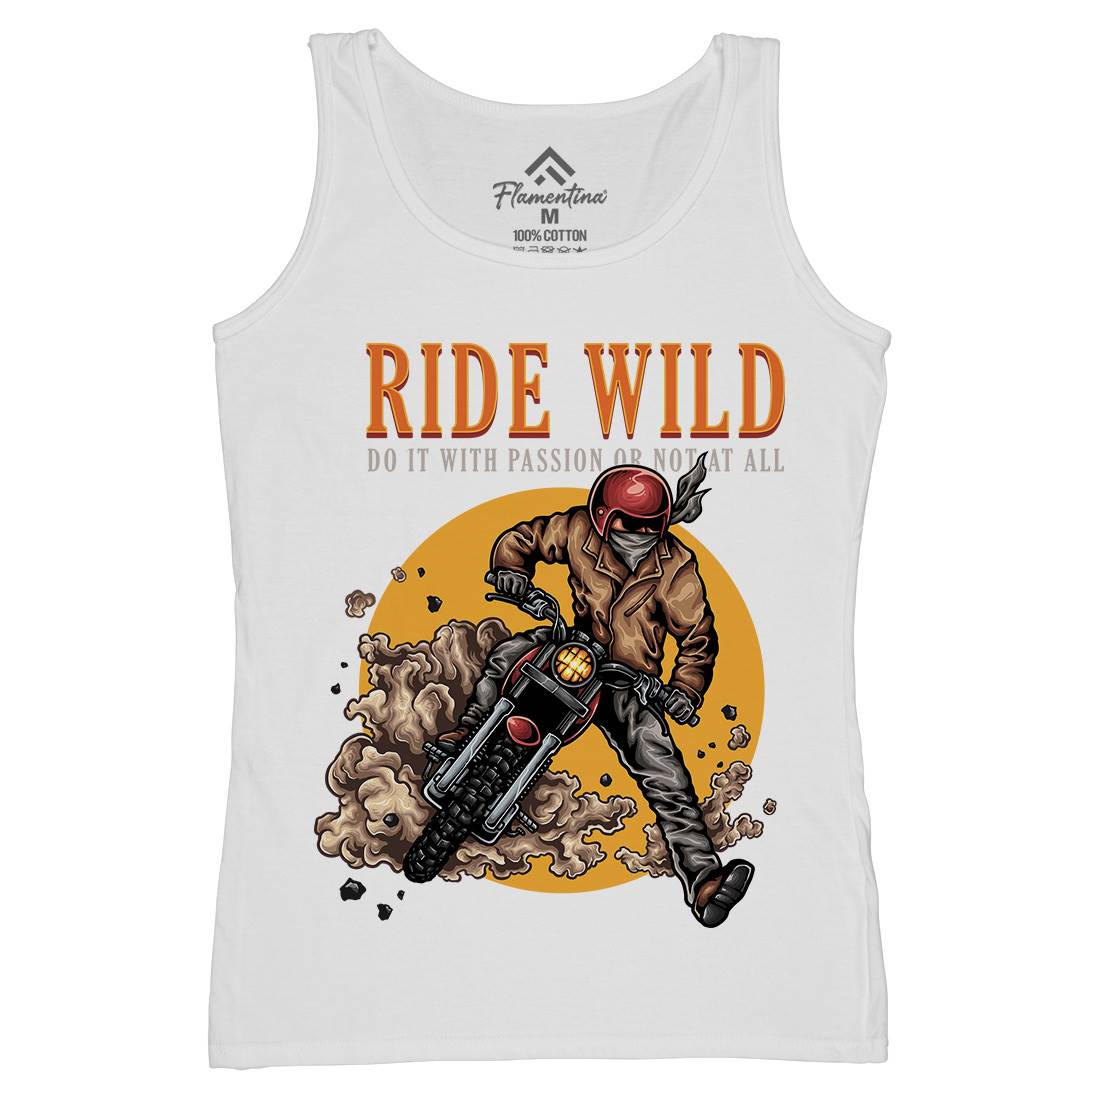 Ride Wild Womens Organic Tank Top Vest Motorcycles A460